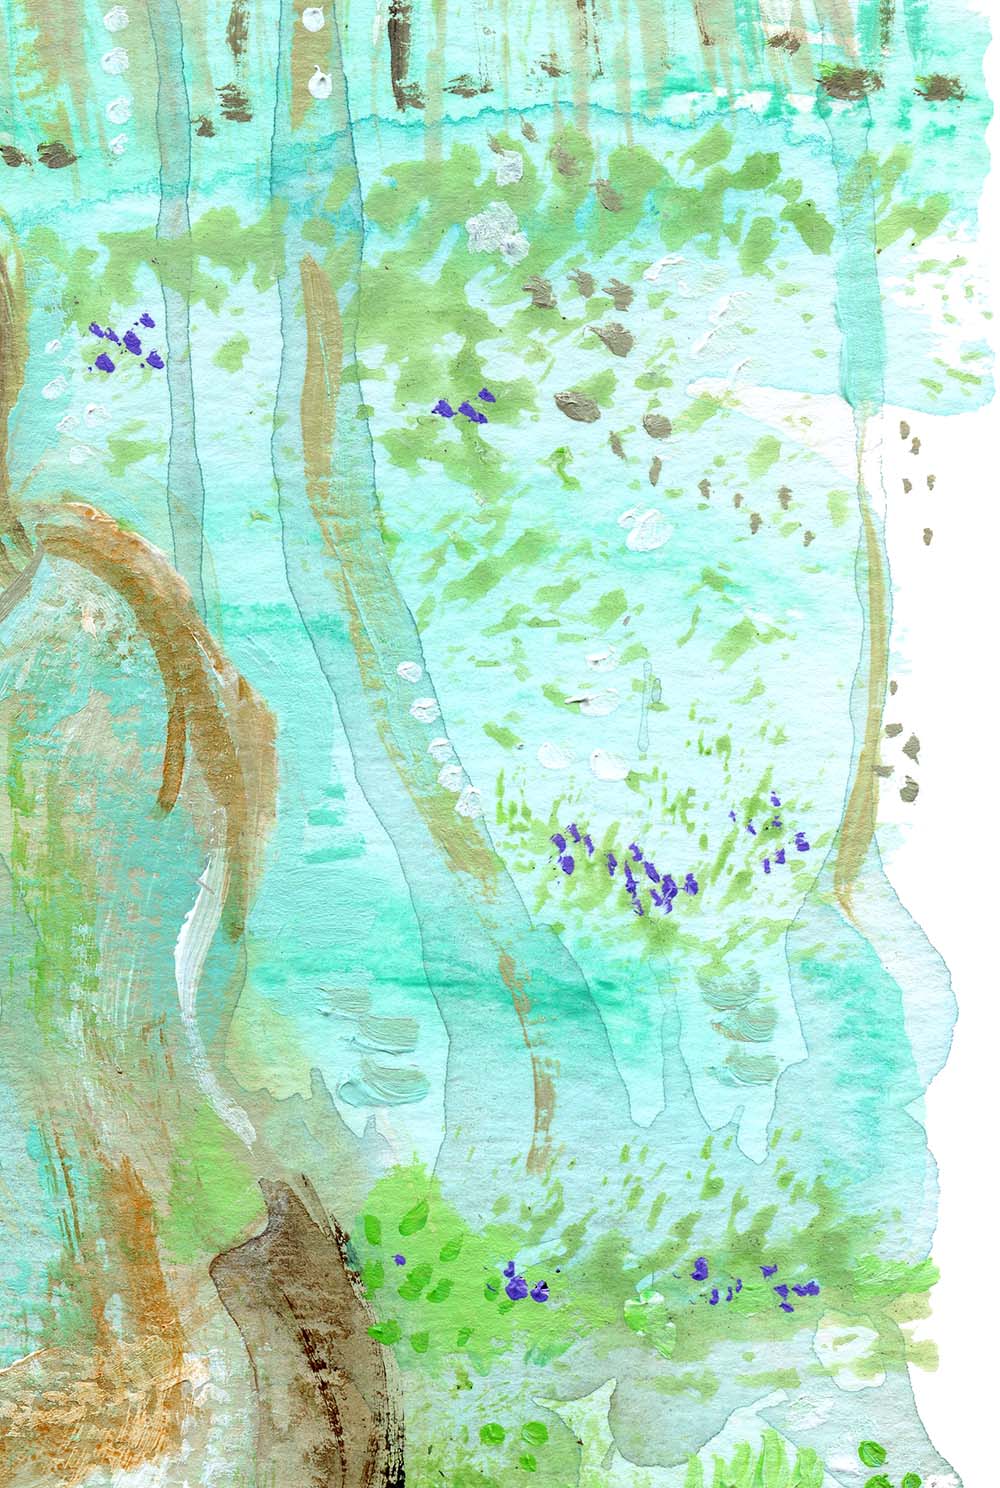 woman and child sitting in a forest, flowers in grass, aqua green blue artwork, dreamy woods, dreamy nature artwork of mother and child kmberggren